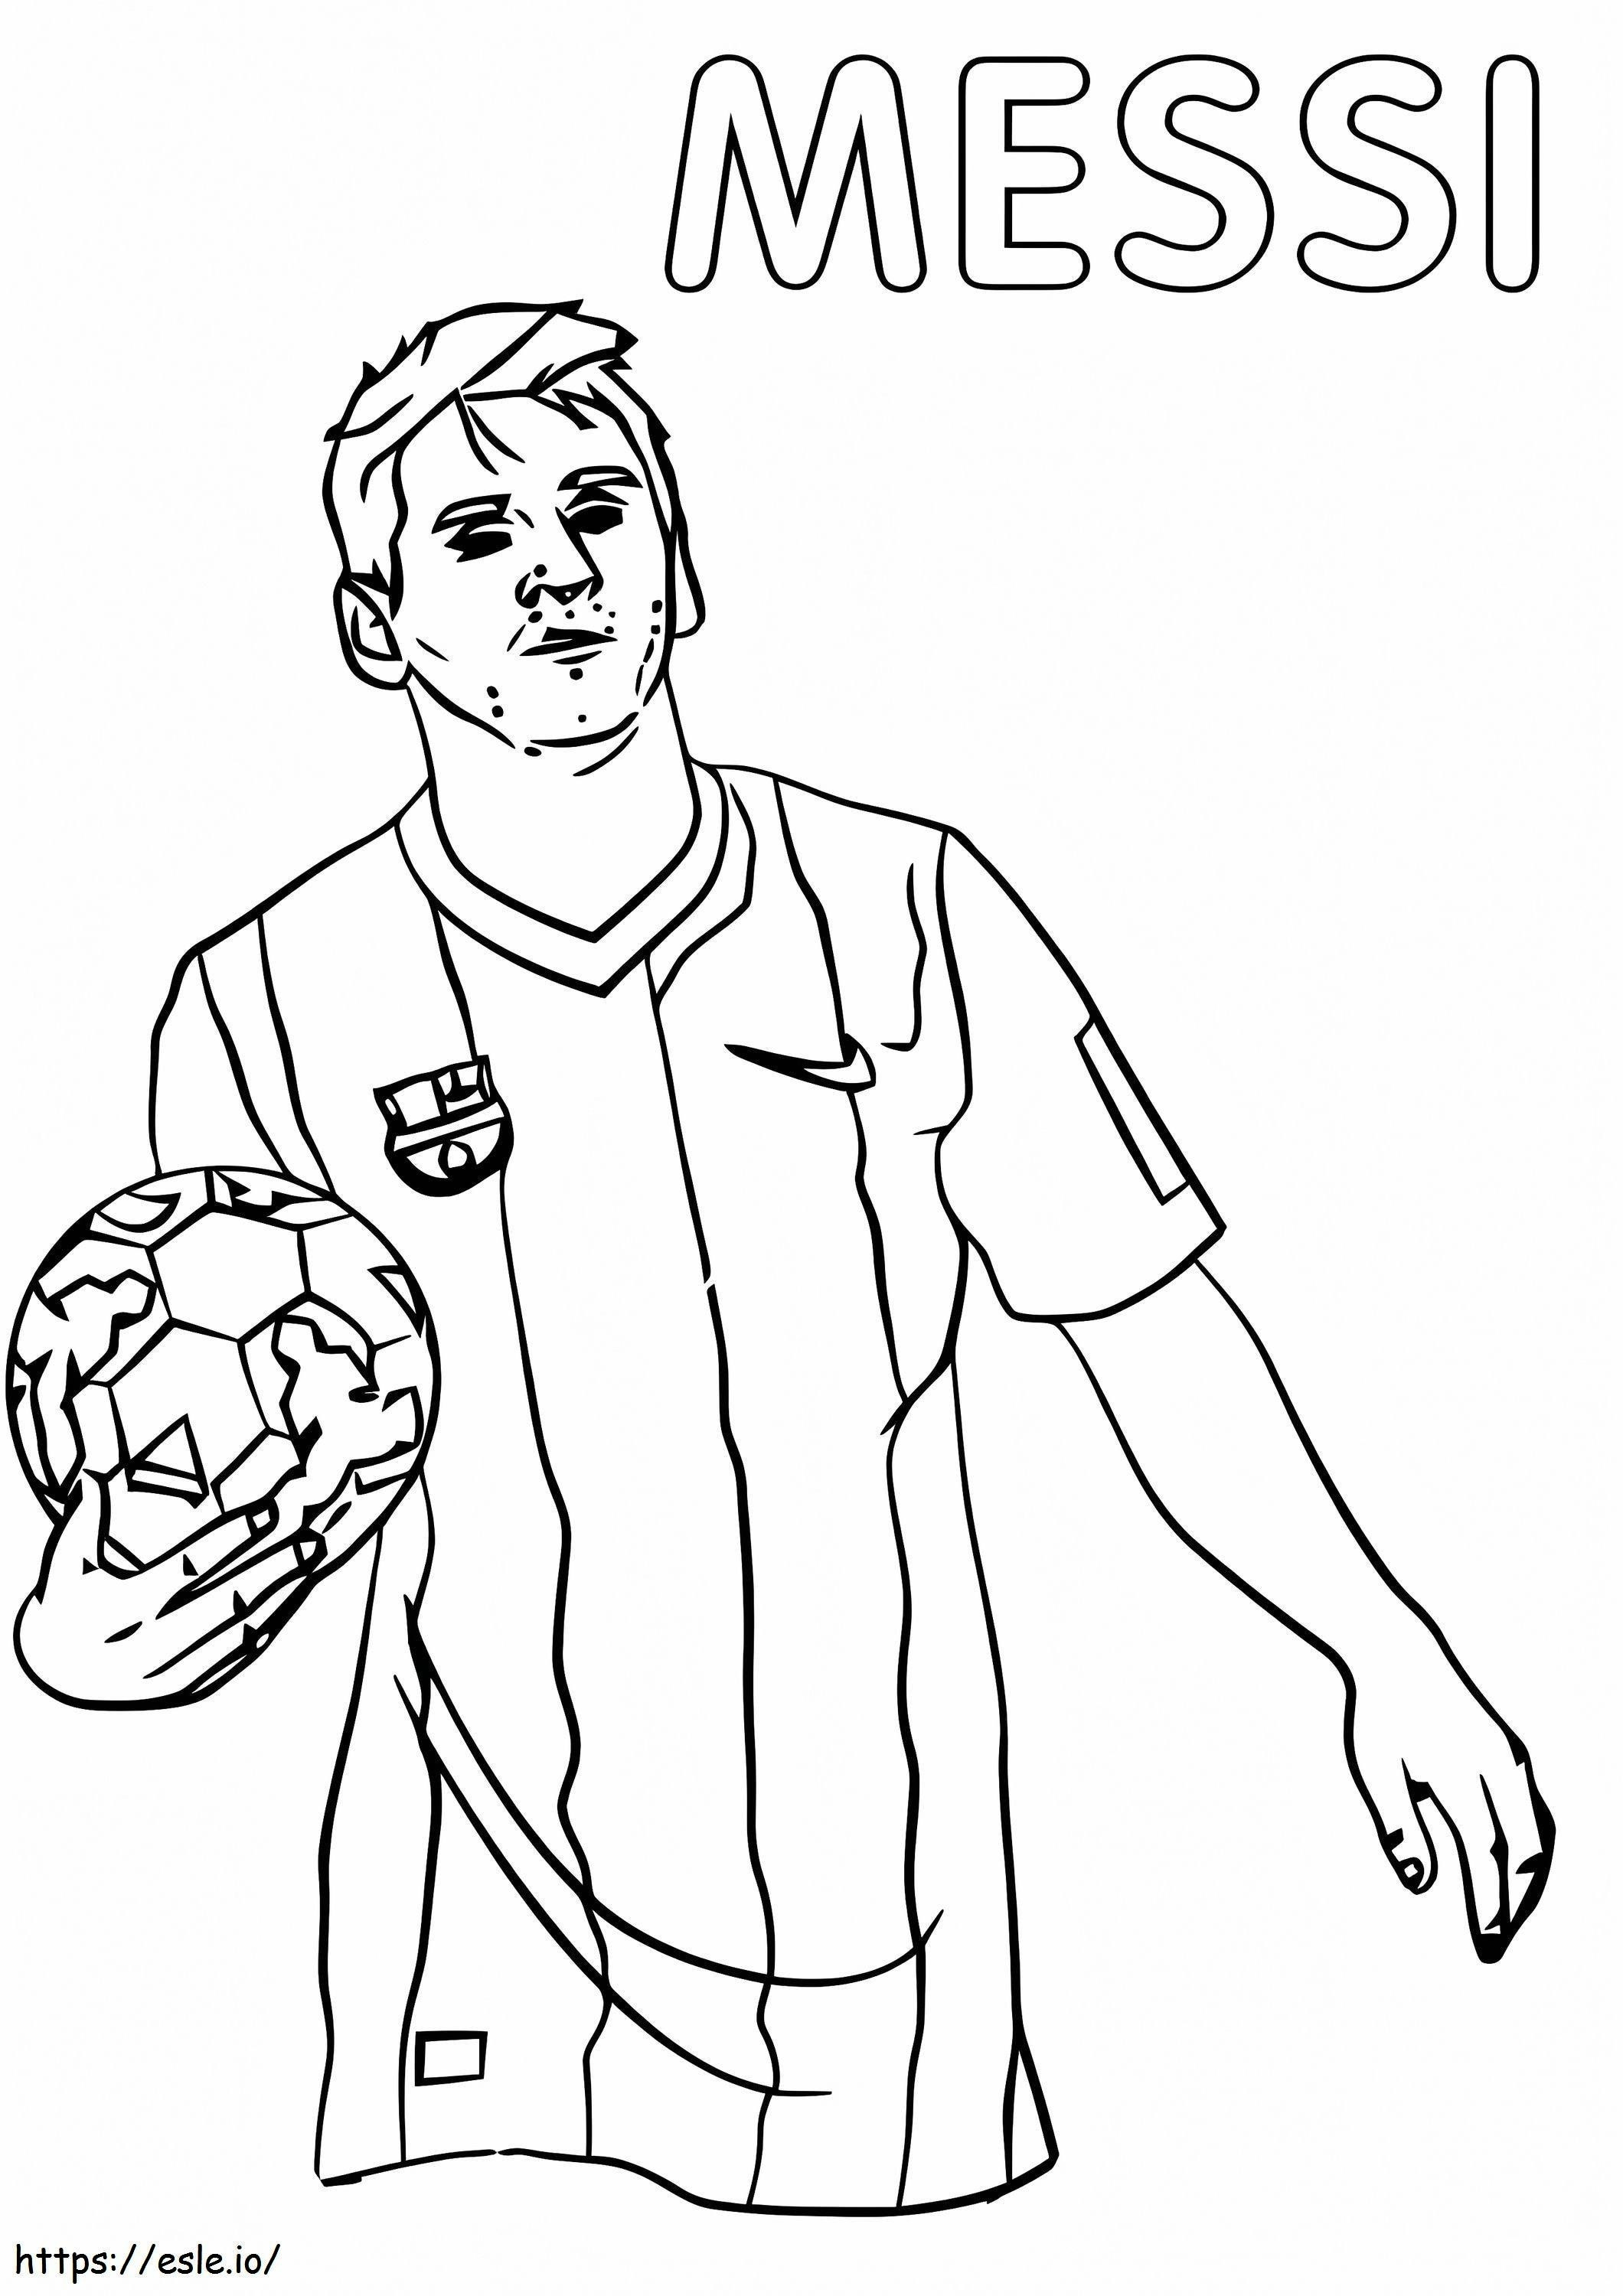 Messi 1 coloring page